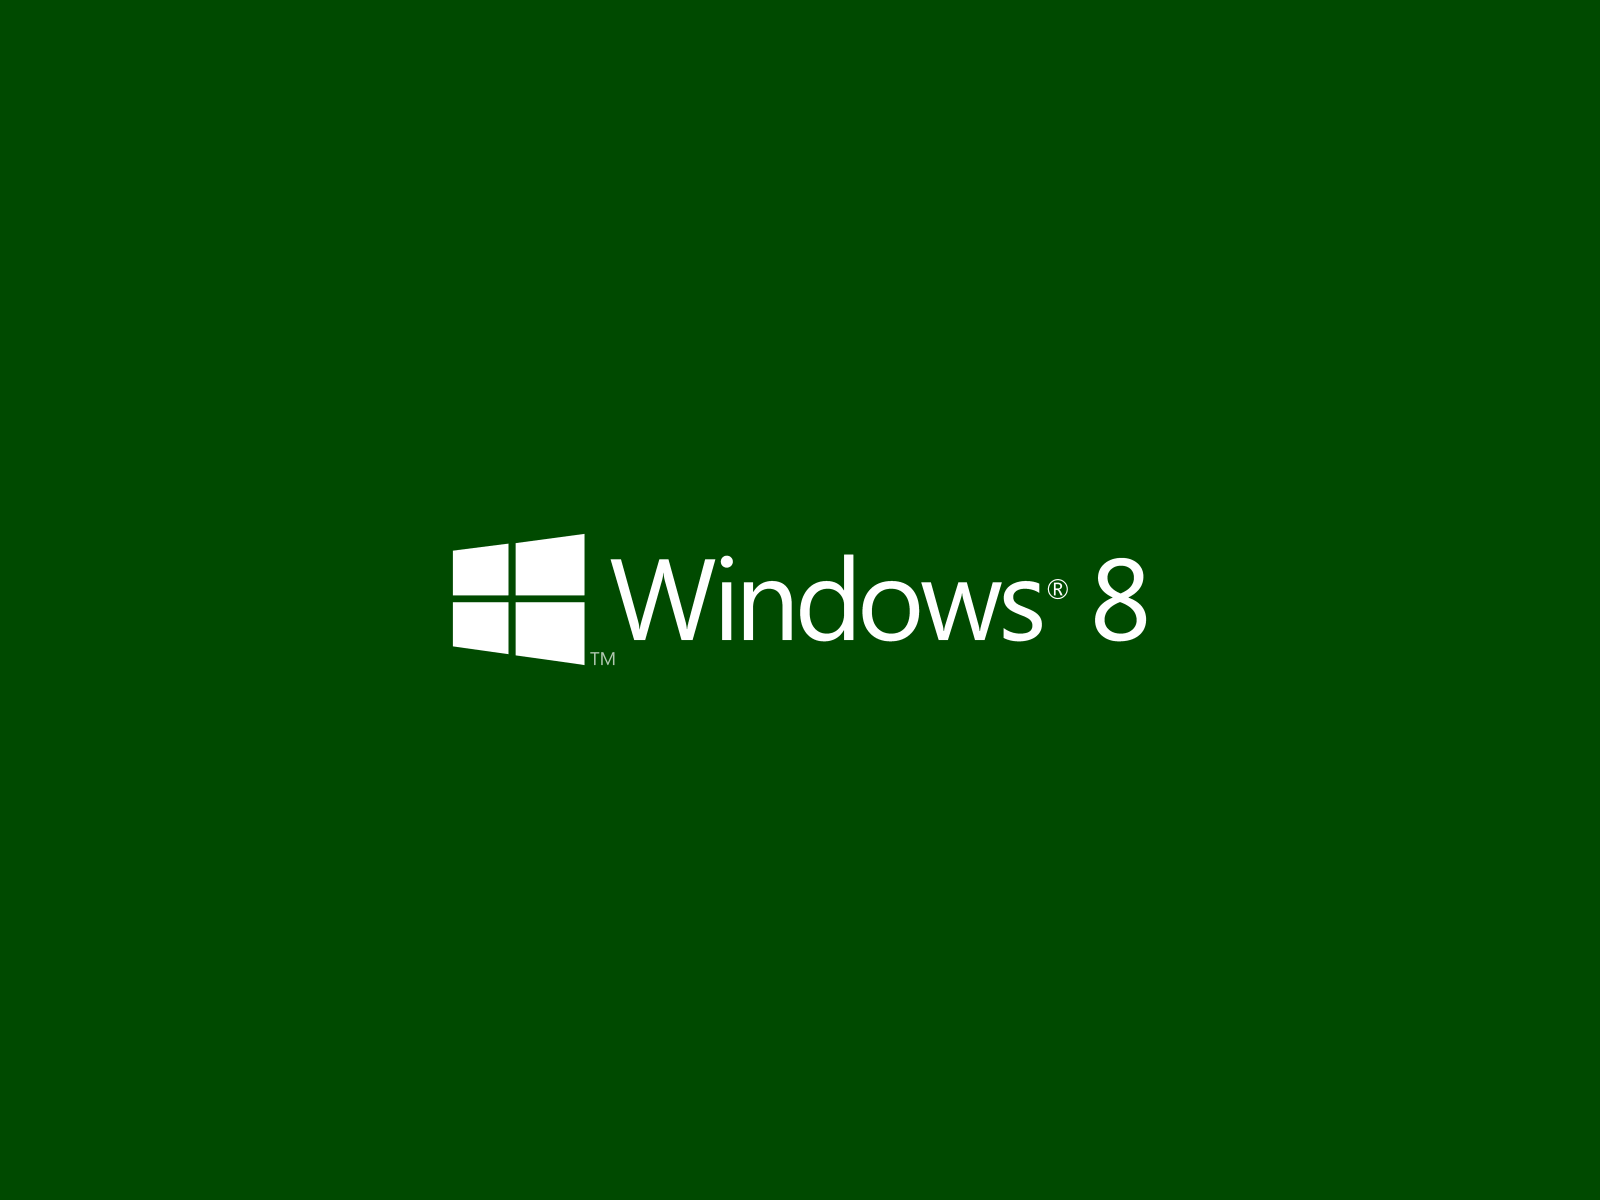 Microsoft Wallpaper Windows 8 28442 HD Picture. Top Background Free